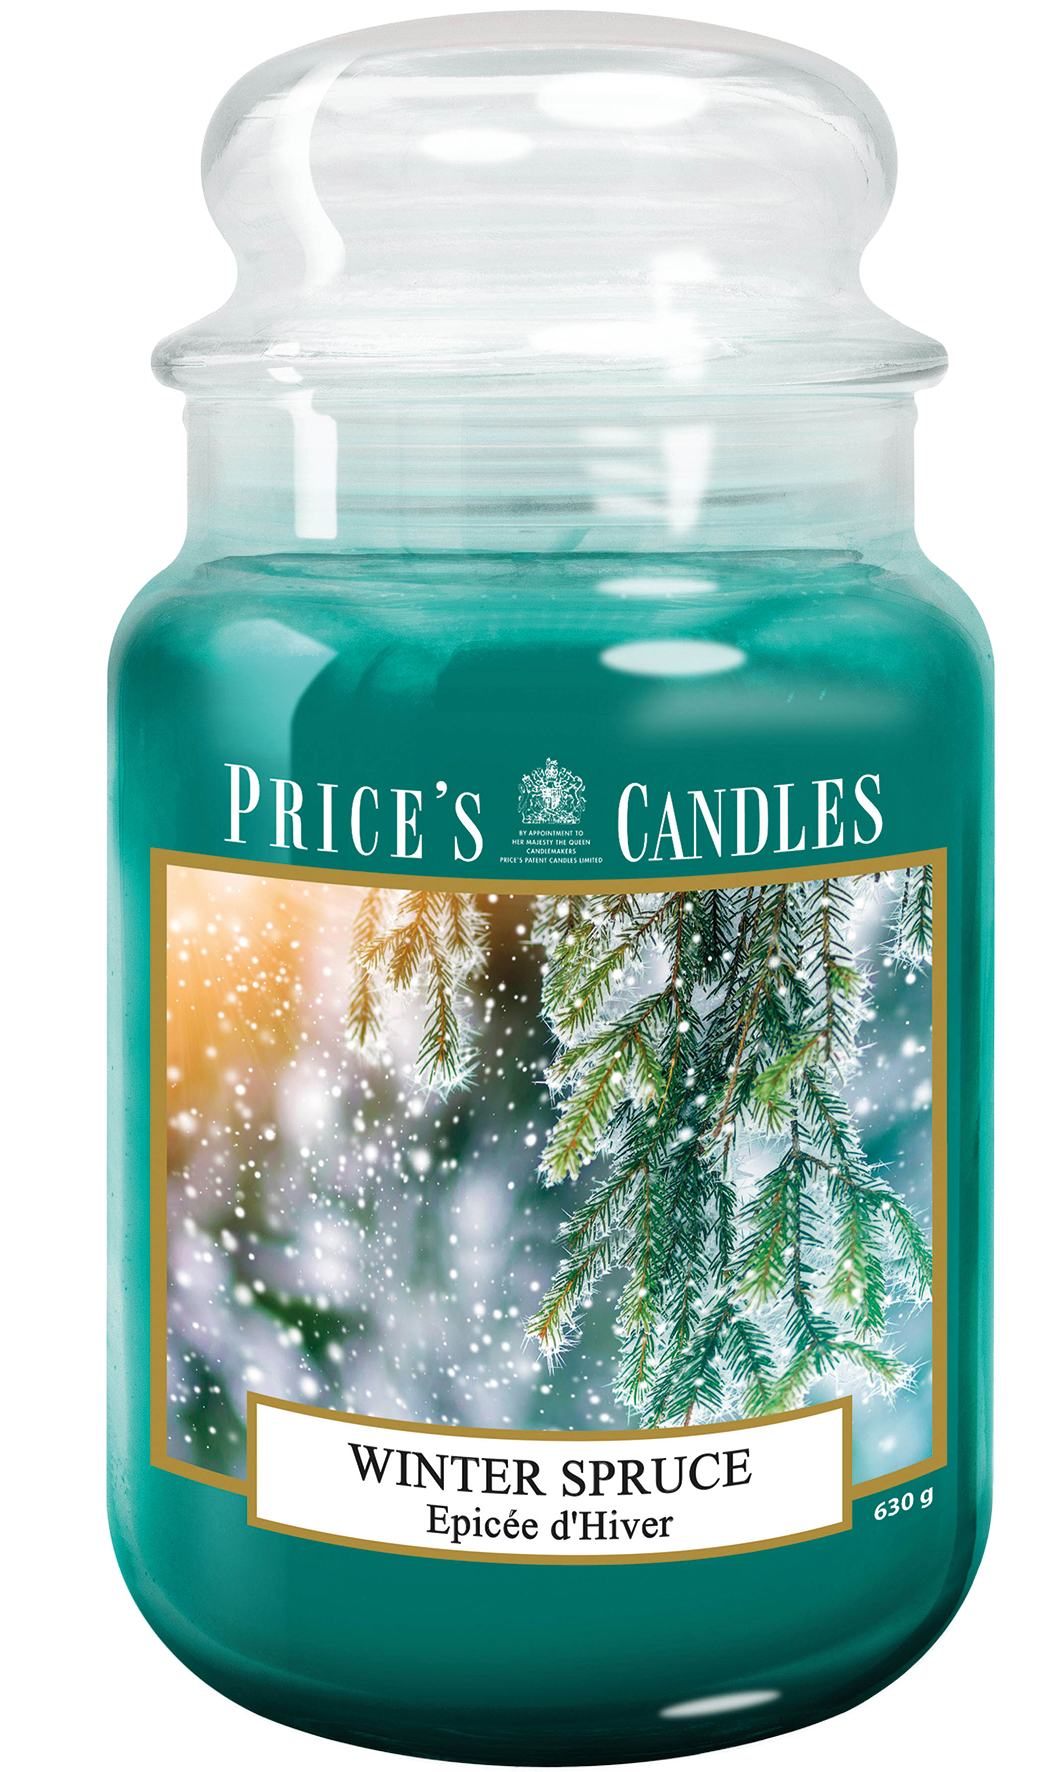 Prices Candle "Winter Spruce" 630g  